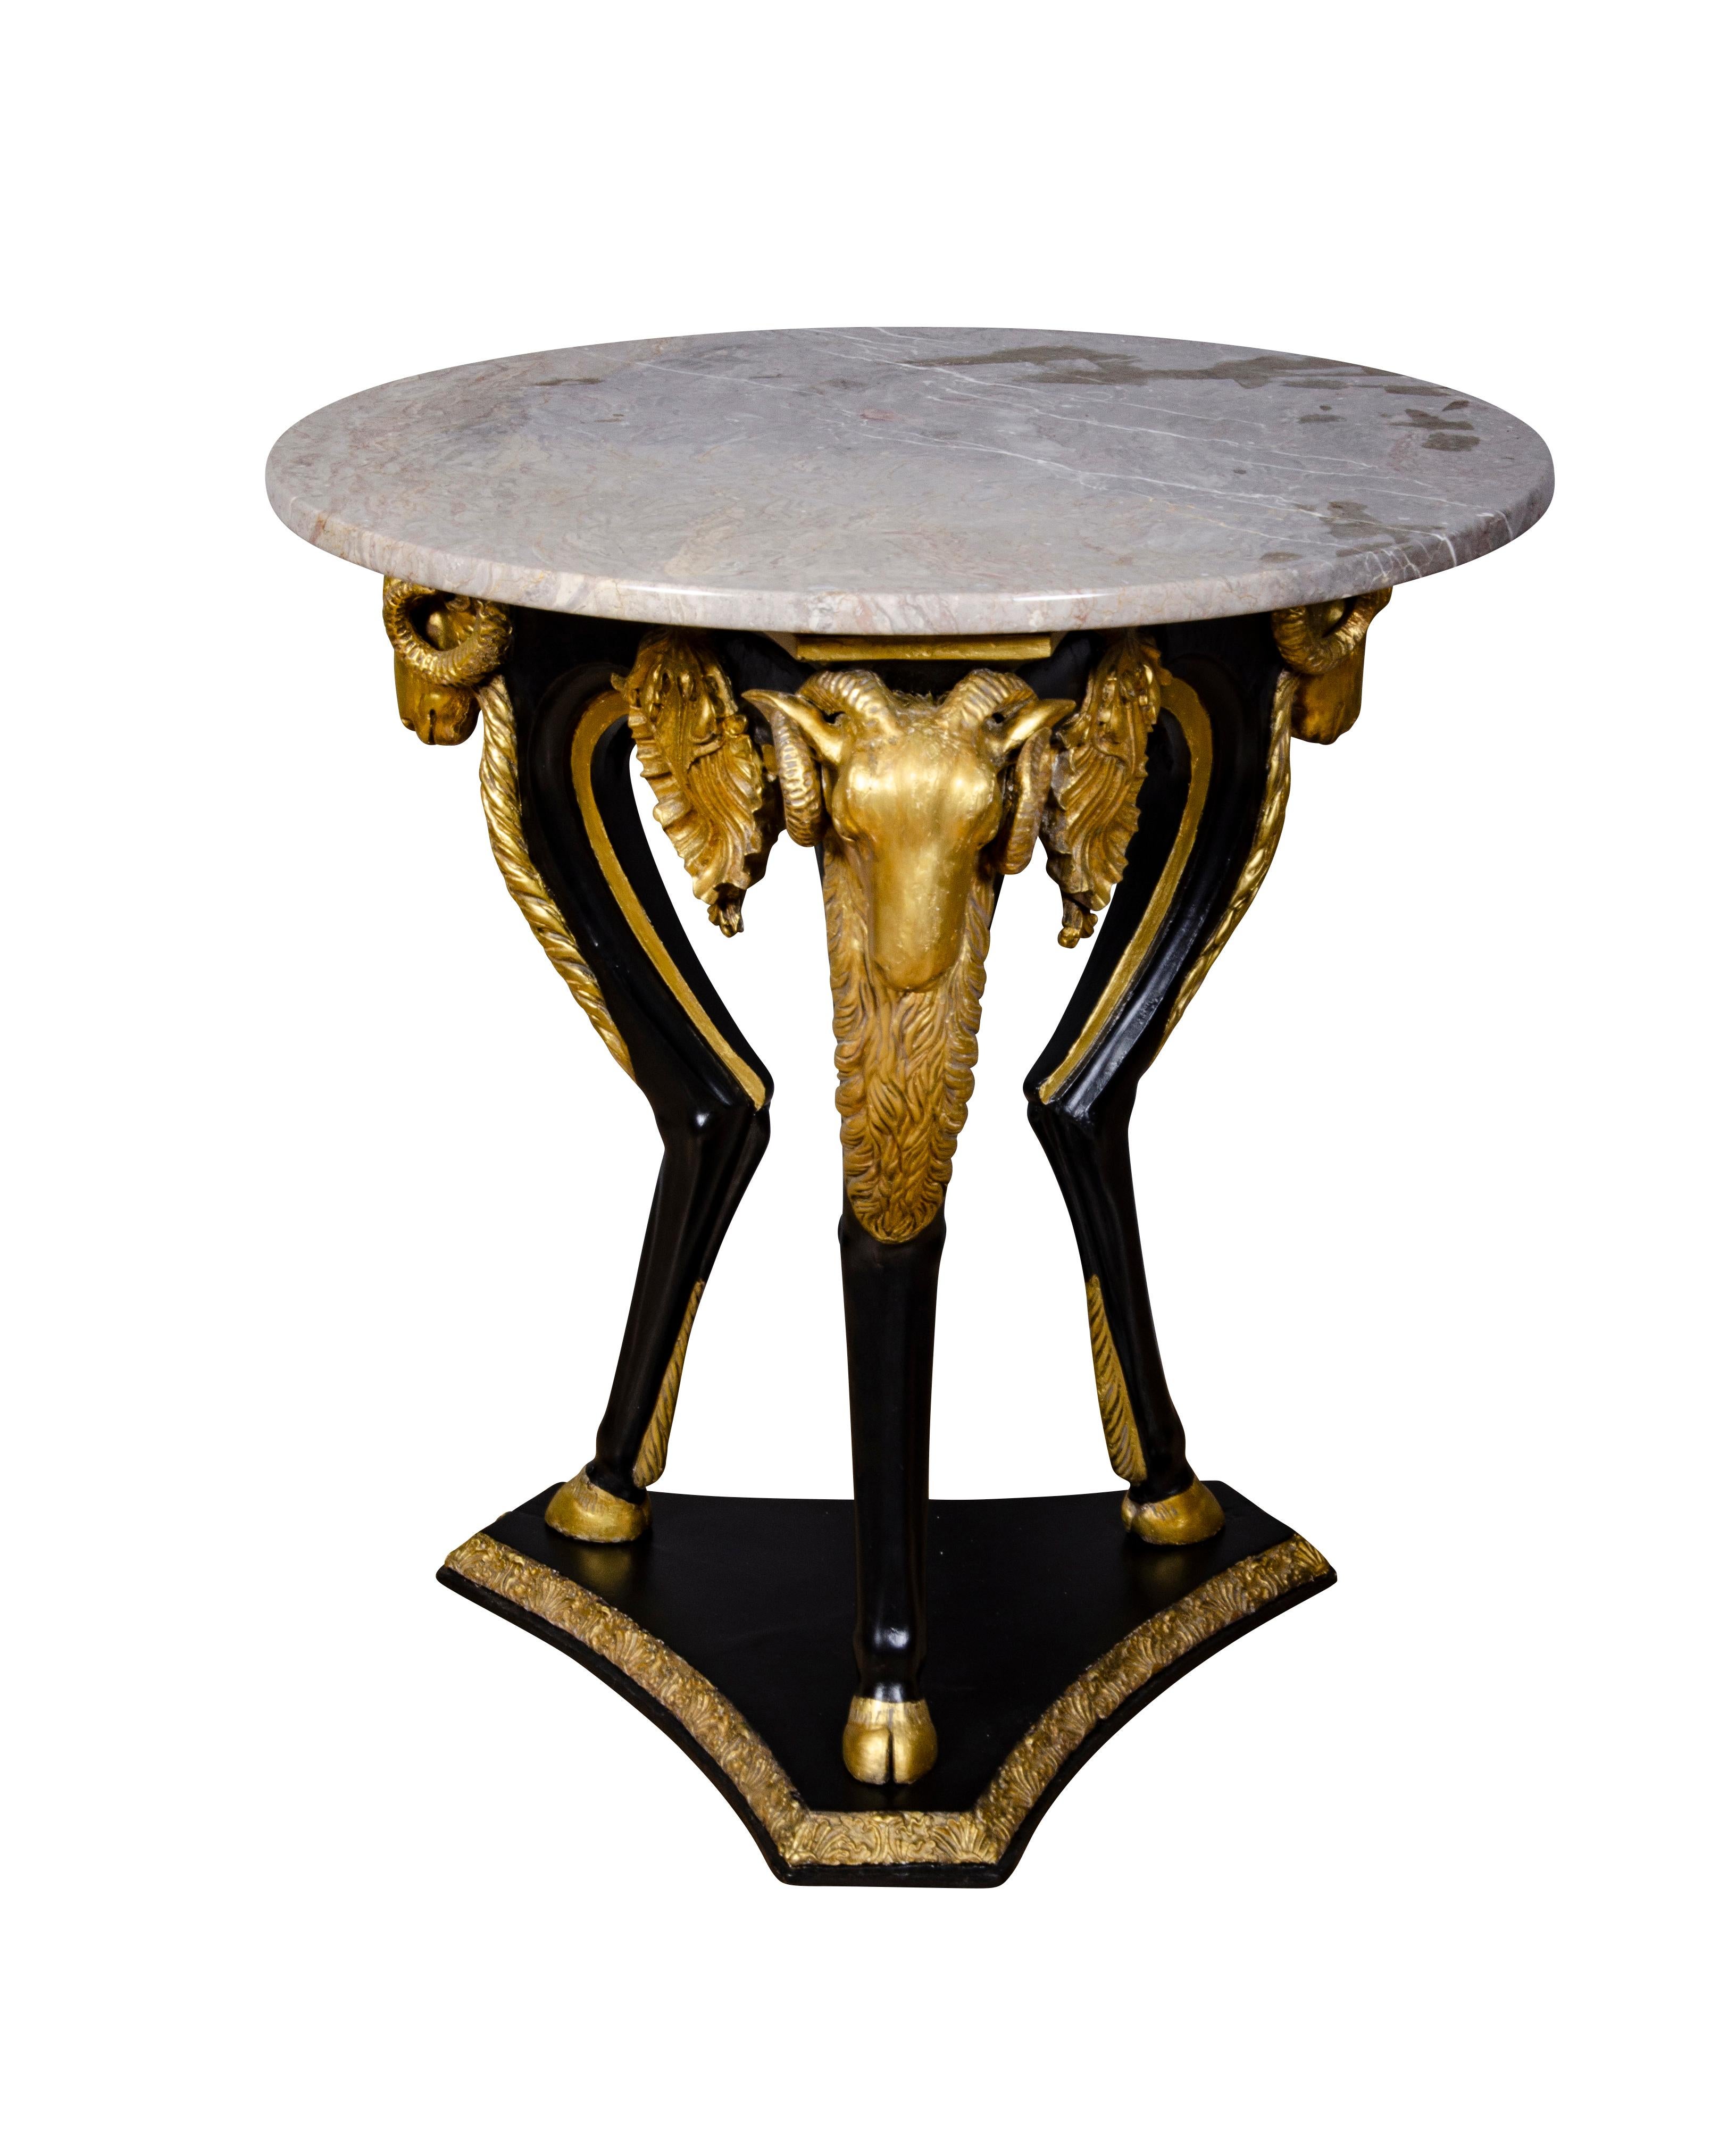 European Swedish Neoclassical Ebonized and Giltwood Center Table For Sale